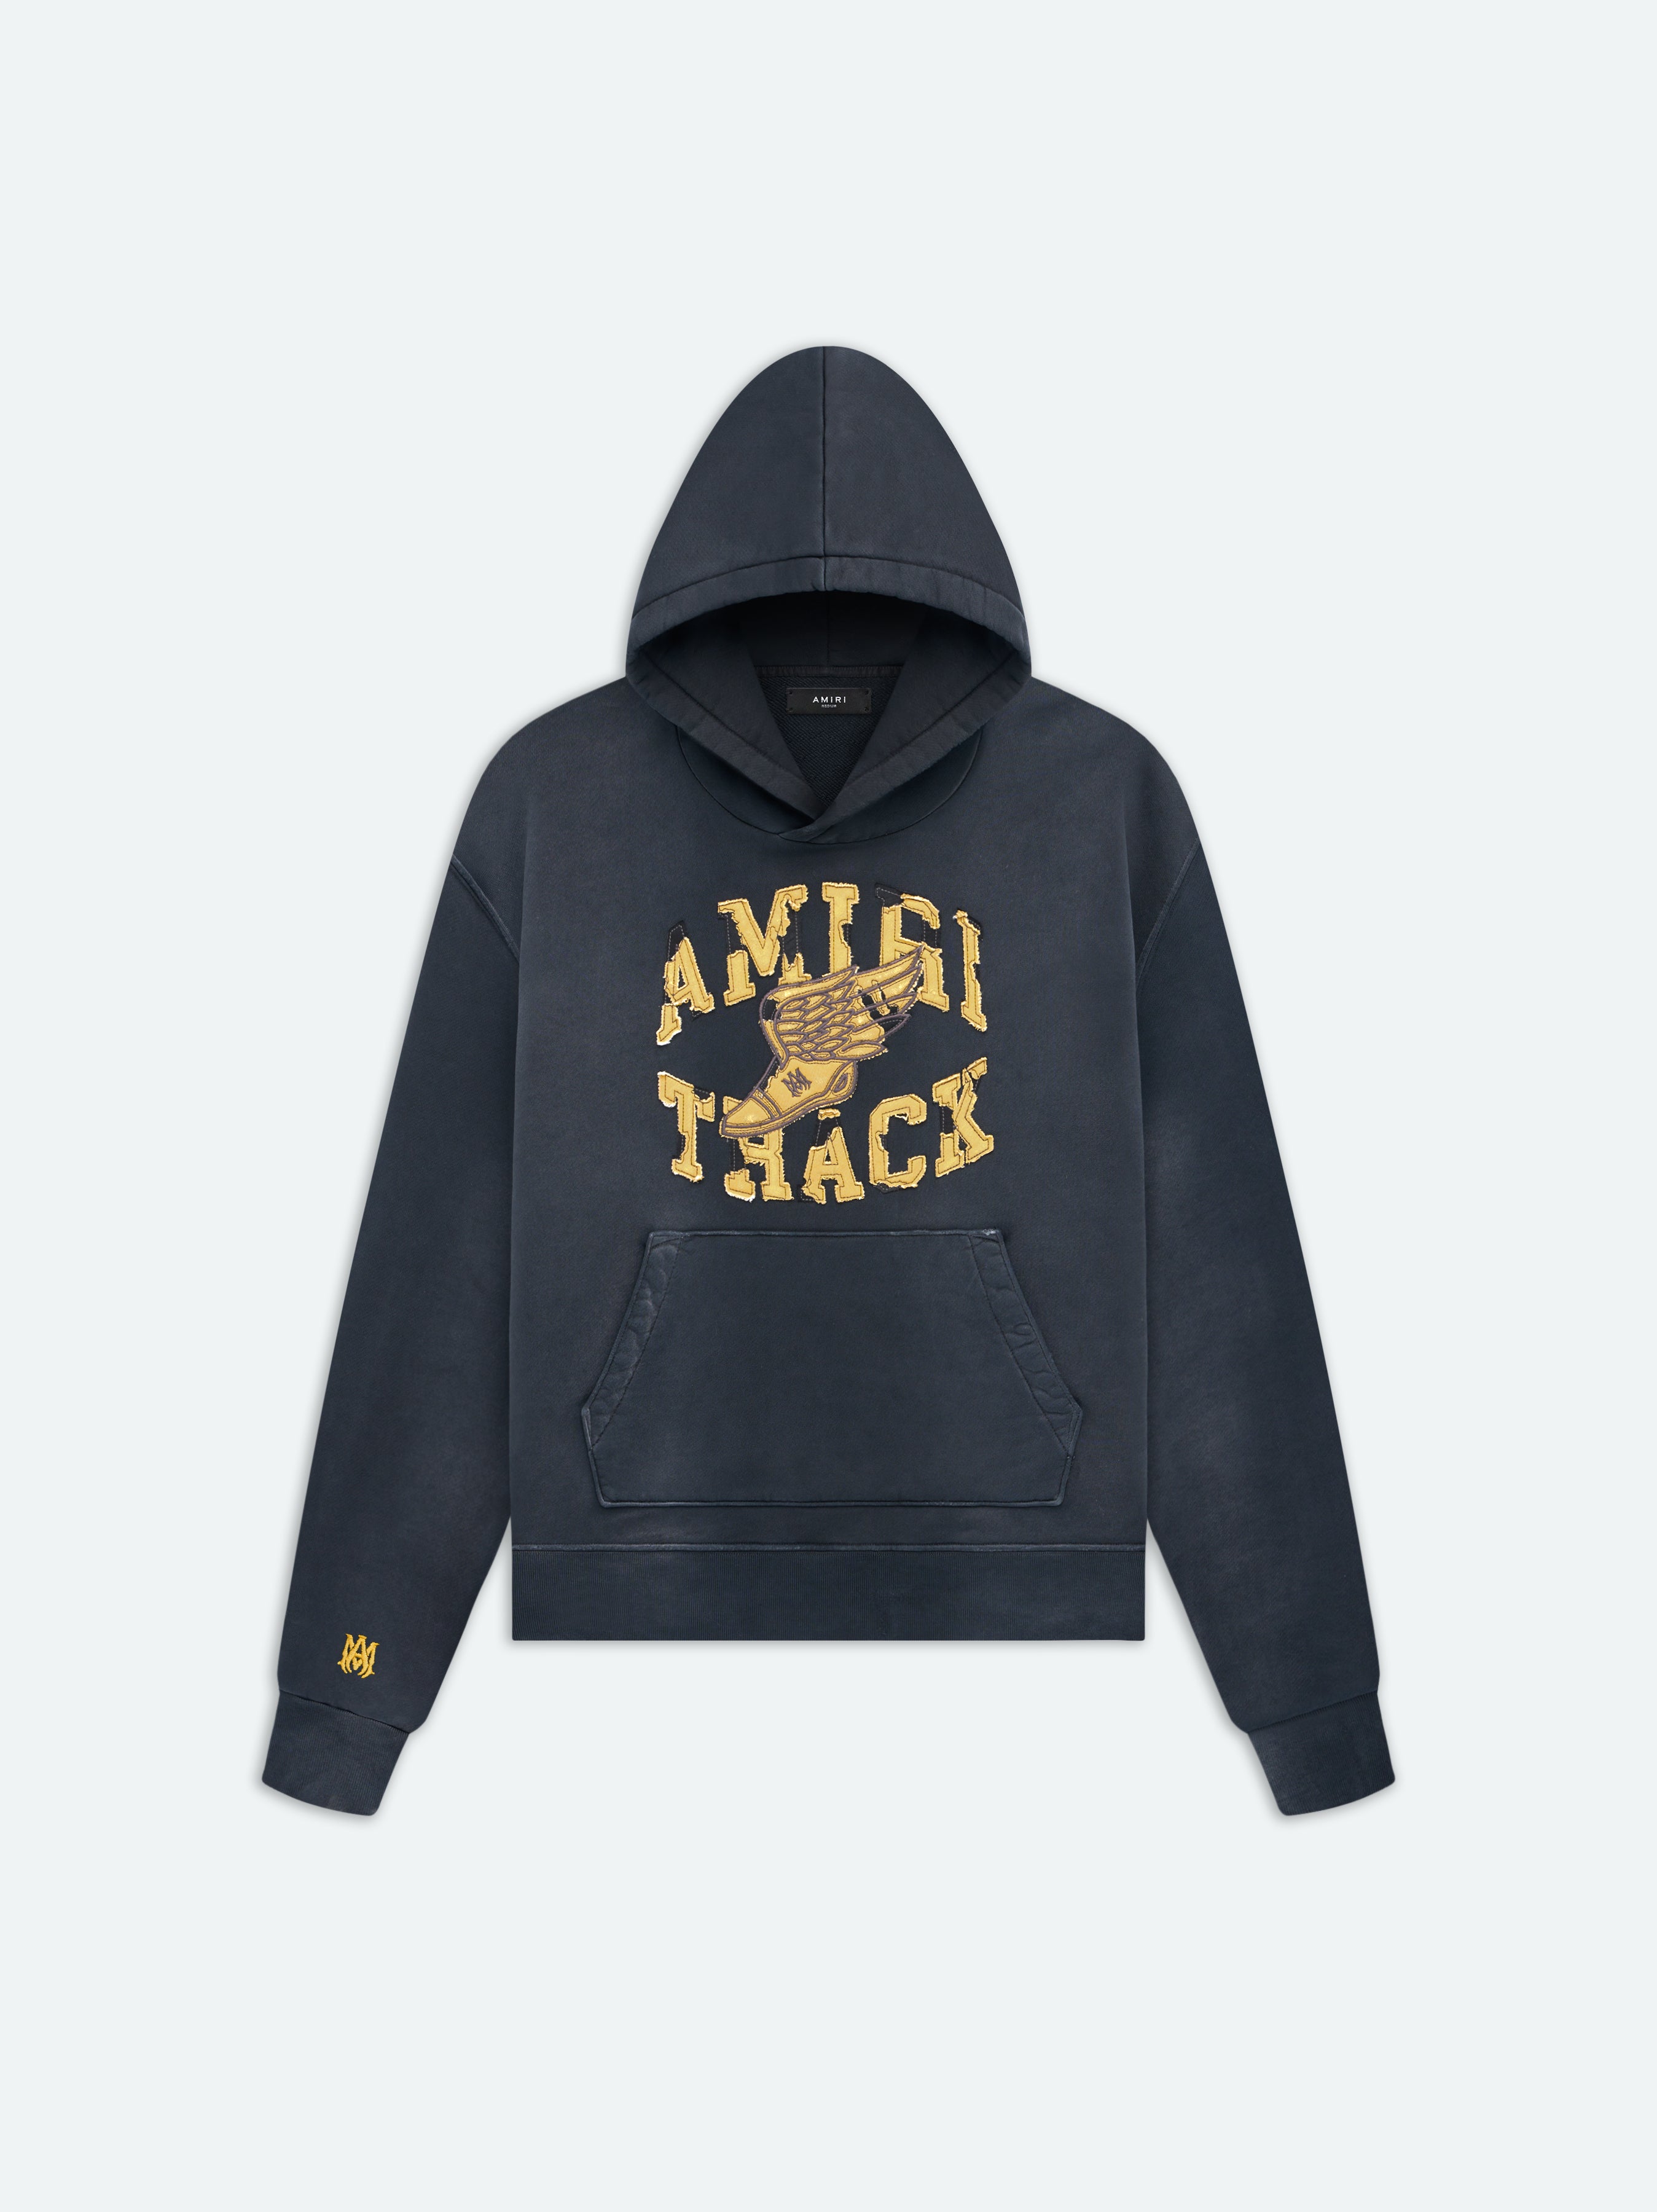 Product AMIRI TRACK HOODIE - Faded Black featured image